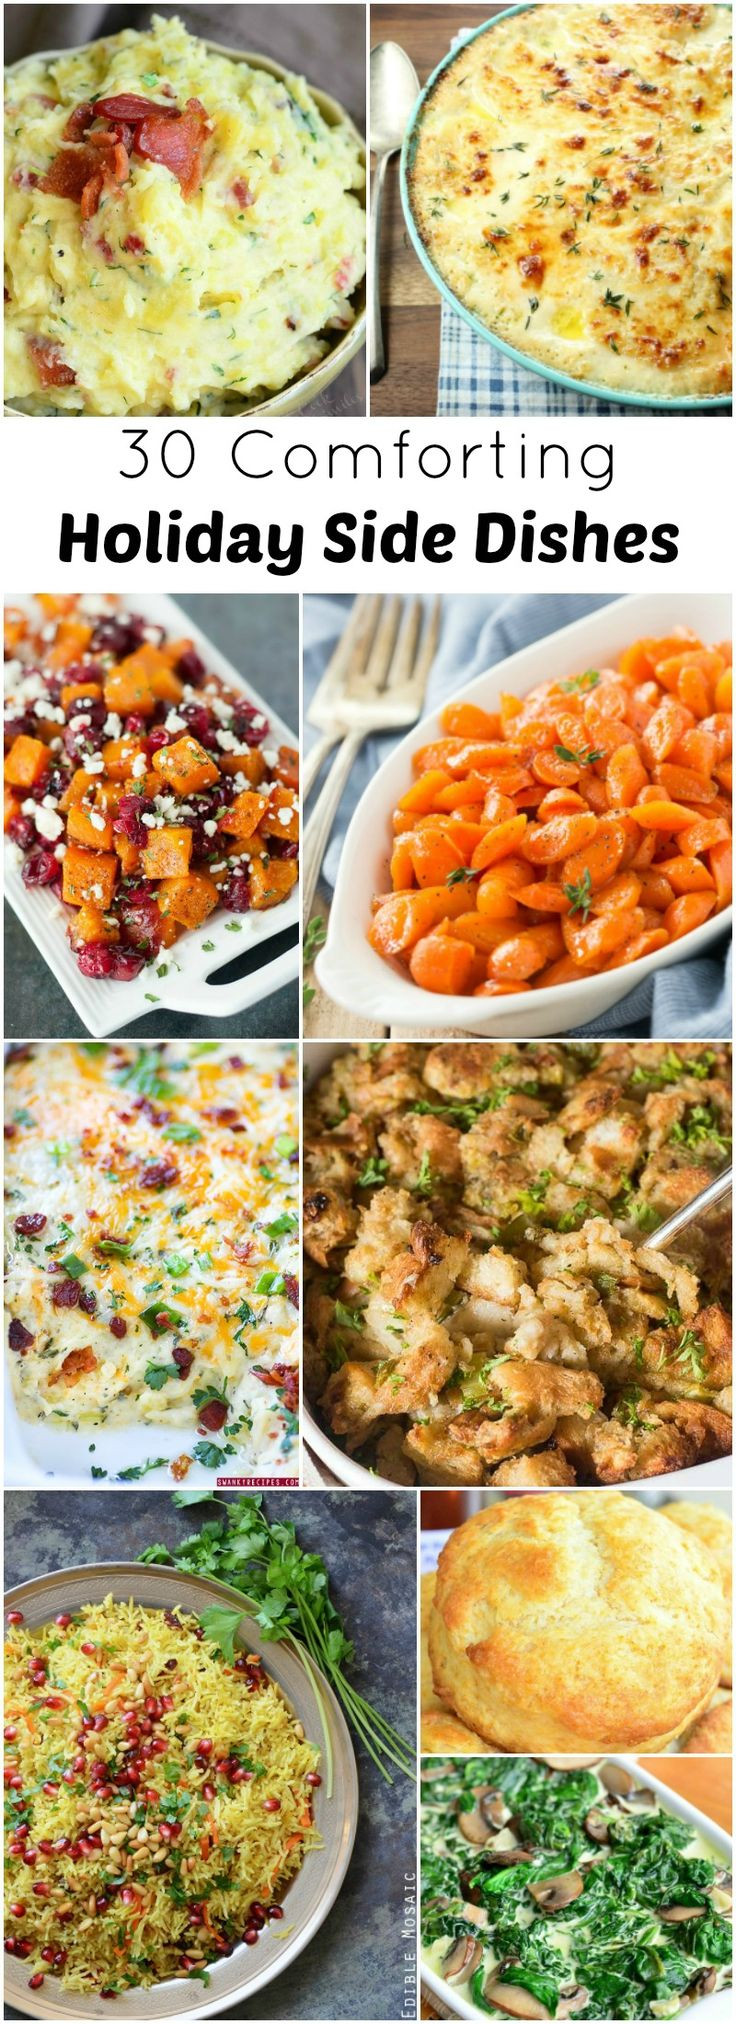 Christmas Dinner Side Dishes Ideas
 Best 20 Holiday Side Dishes ideas on Pinterest